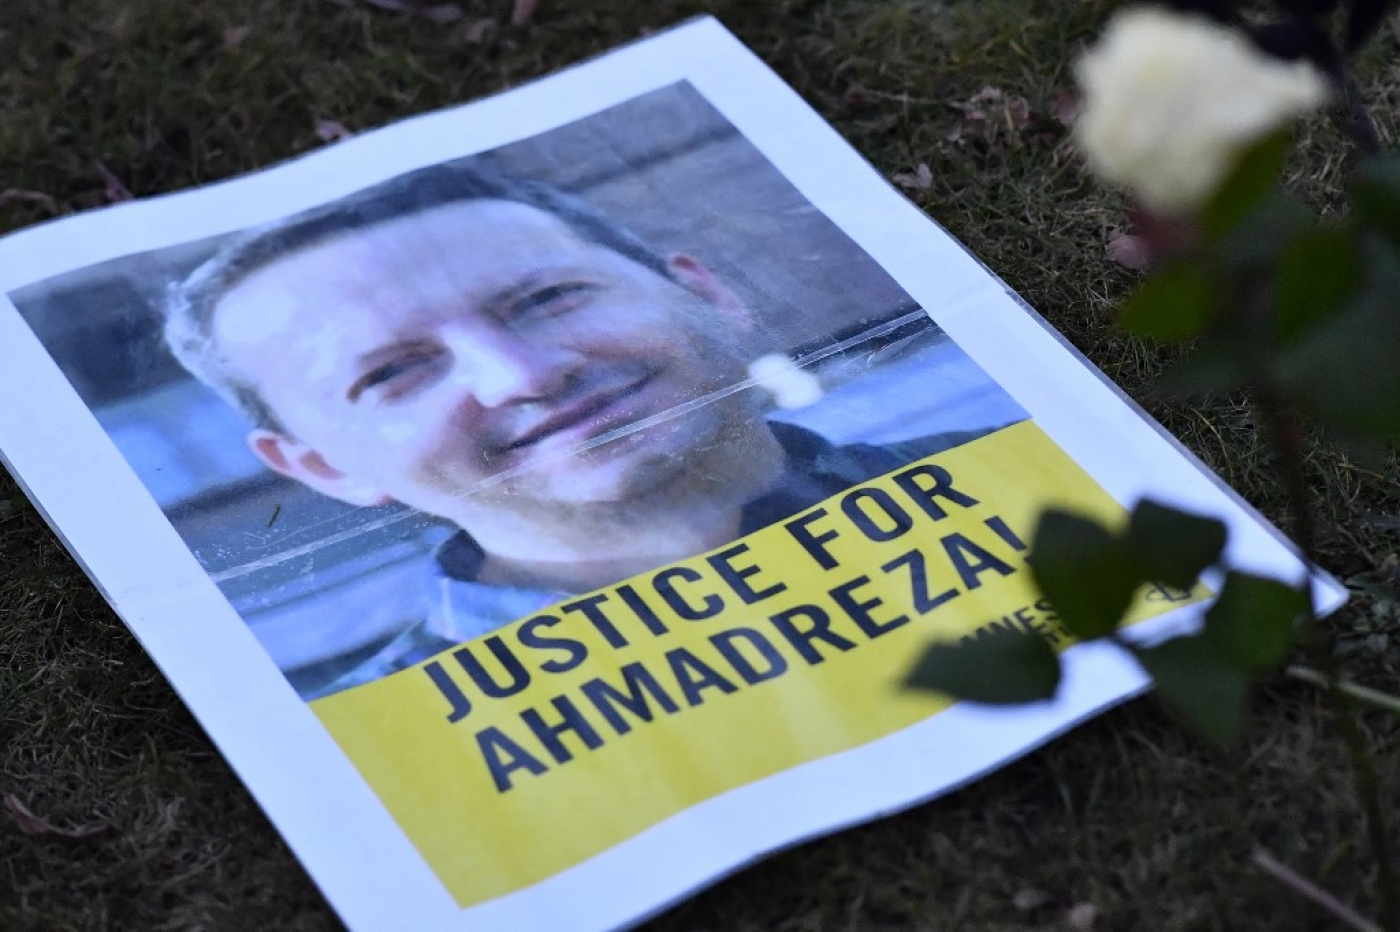 A leaflet during a protest in February 2017 outside the Iranian embassy in Brussels for Ahmadreza Djalali, a Swedish-Iranian academic sentenced to death in Tehran (AFP)